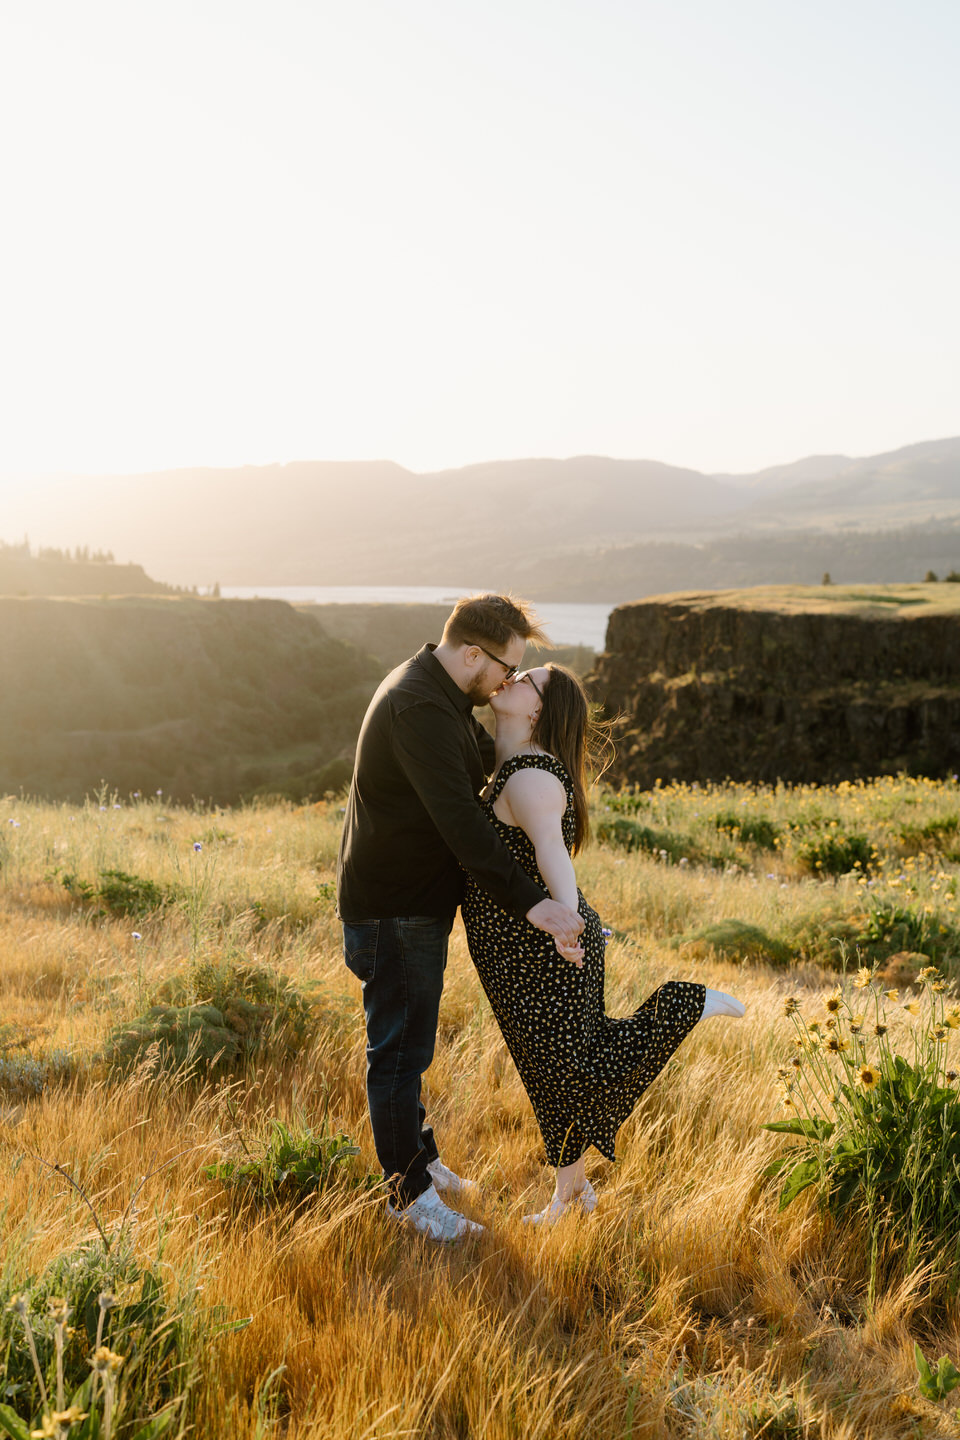 couple kisses in a grassy field